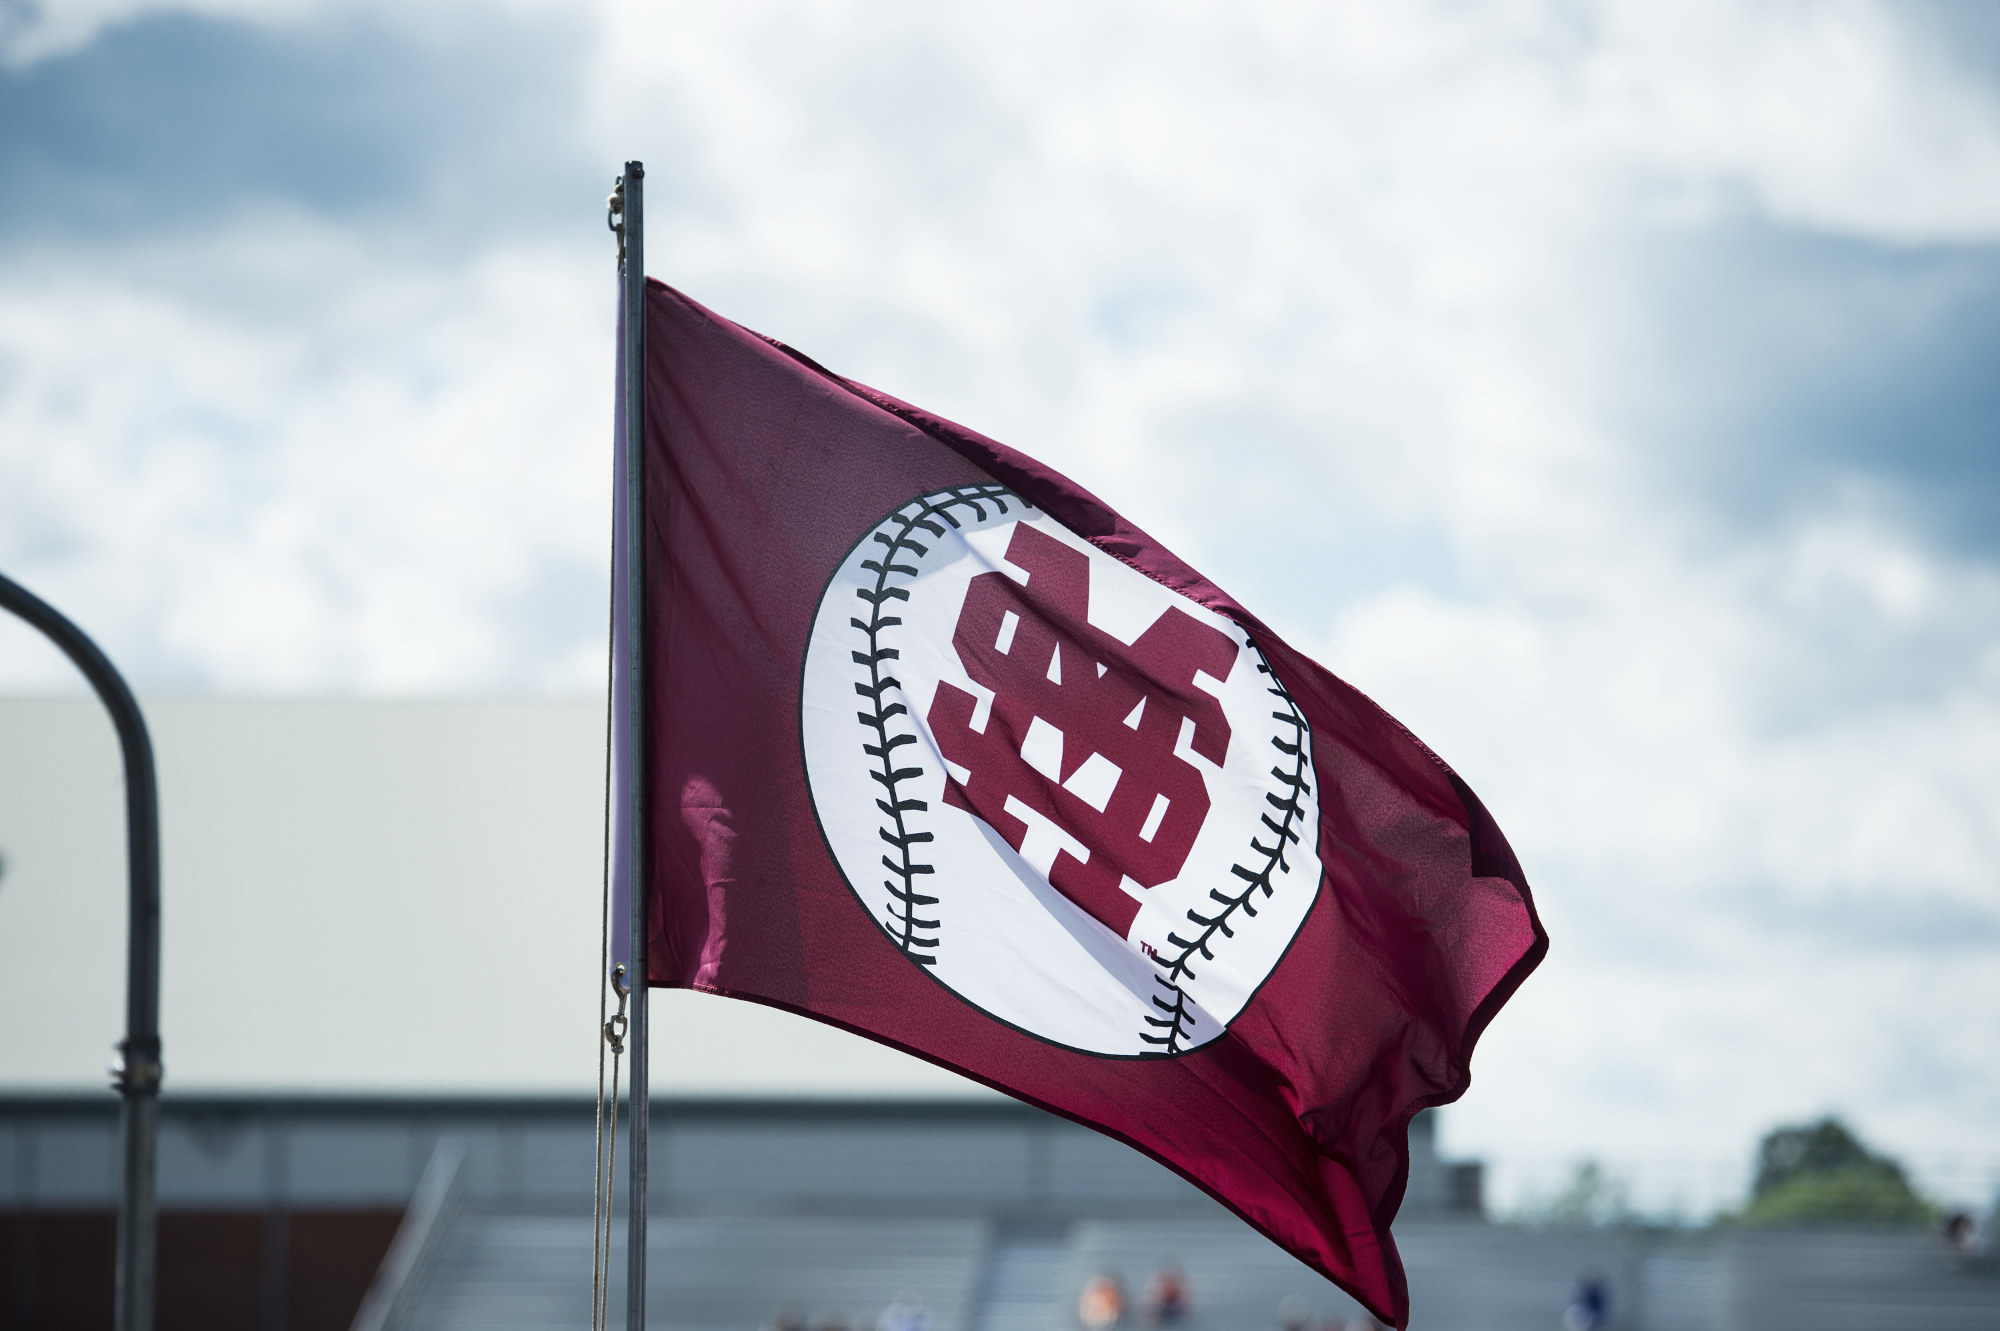 Super Bulldog Weekend [April 15-17] includes a must-see baseball series between Mississippi State and the Texas A&M Aggies, both nationally ranked Top 10 teams.